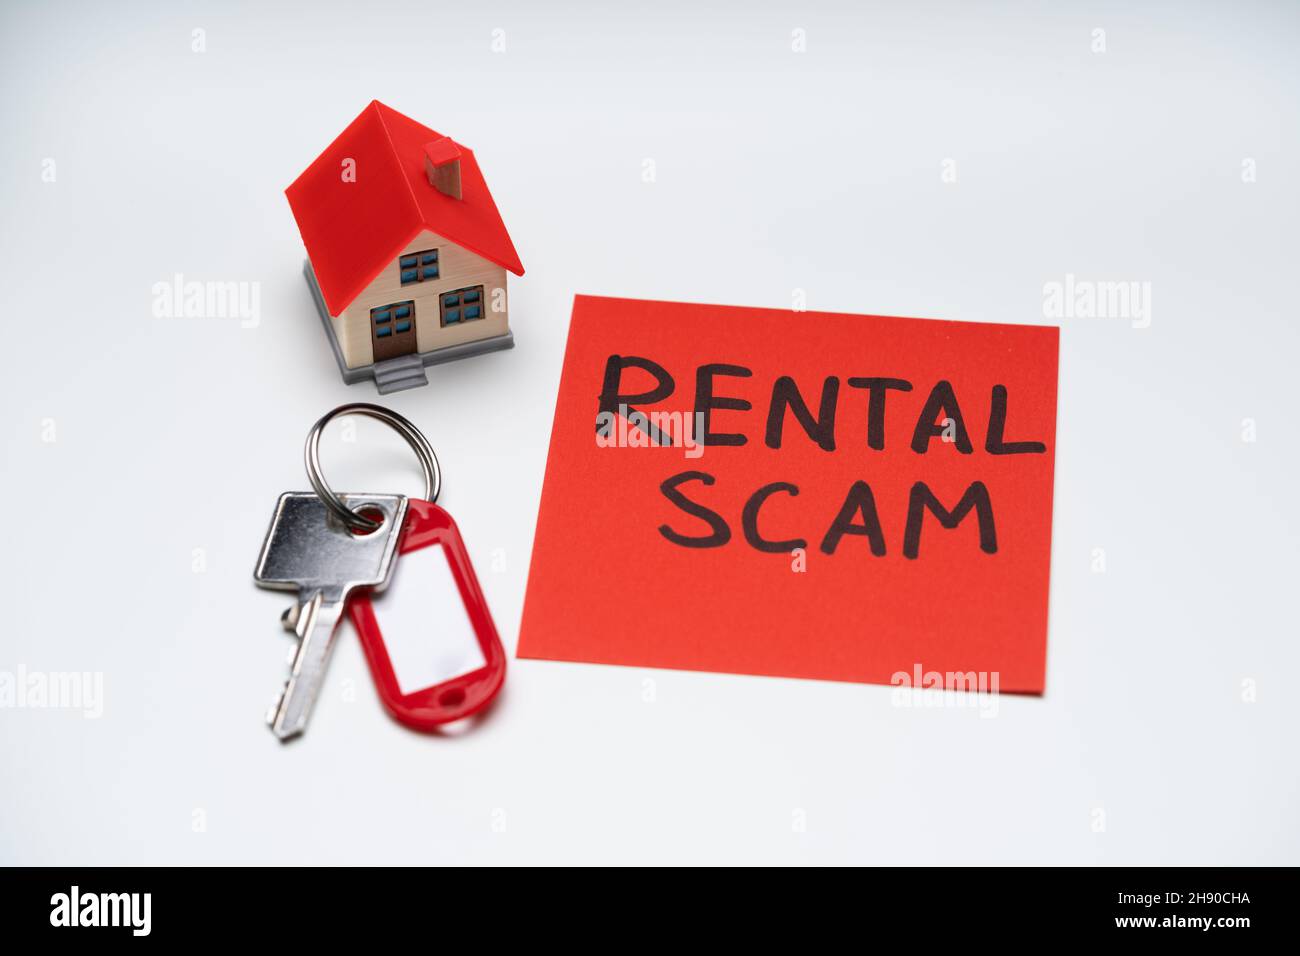 Rental Scam Fraud And Crime. Illegal Fake Home Trick Stock Photo